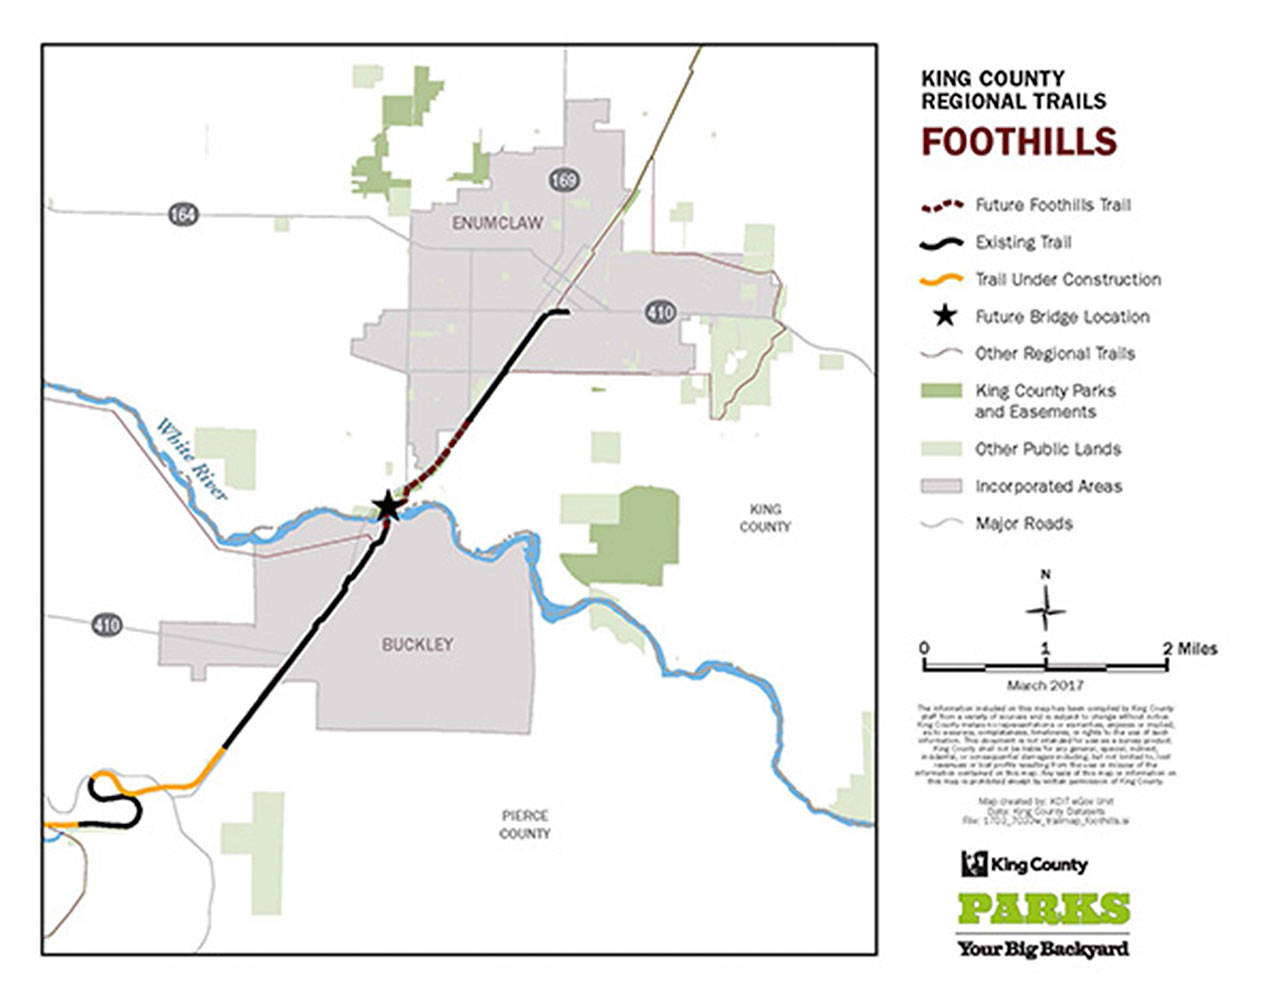 As soon as the Enumclaw and Buckley side of the Foothills Trail meets the White River, a new bridge will be constructed with county and state funds. Image courtesy King County